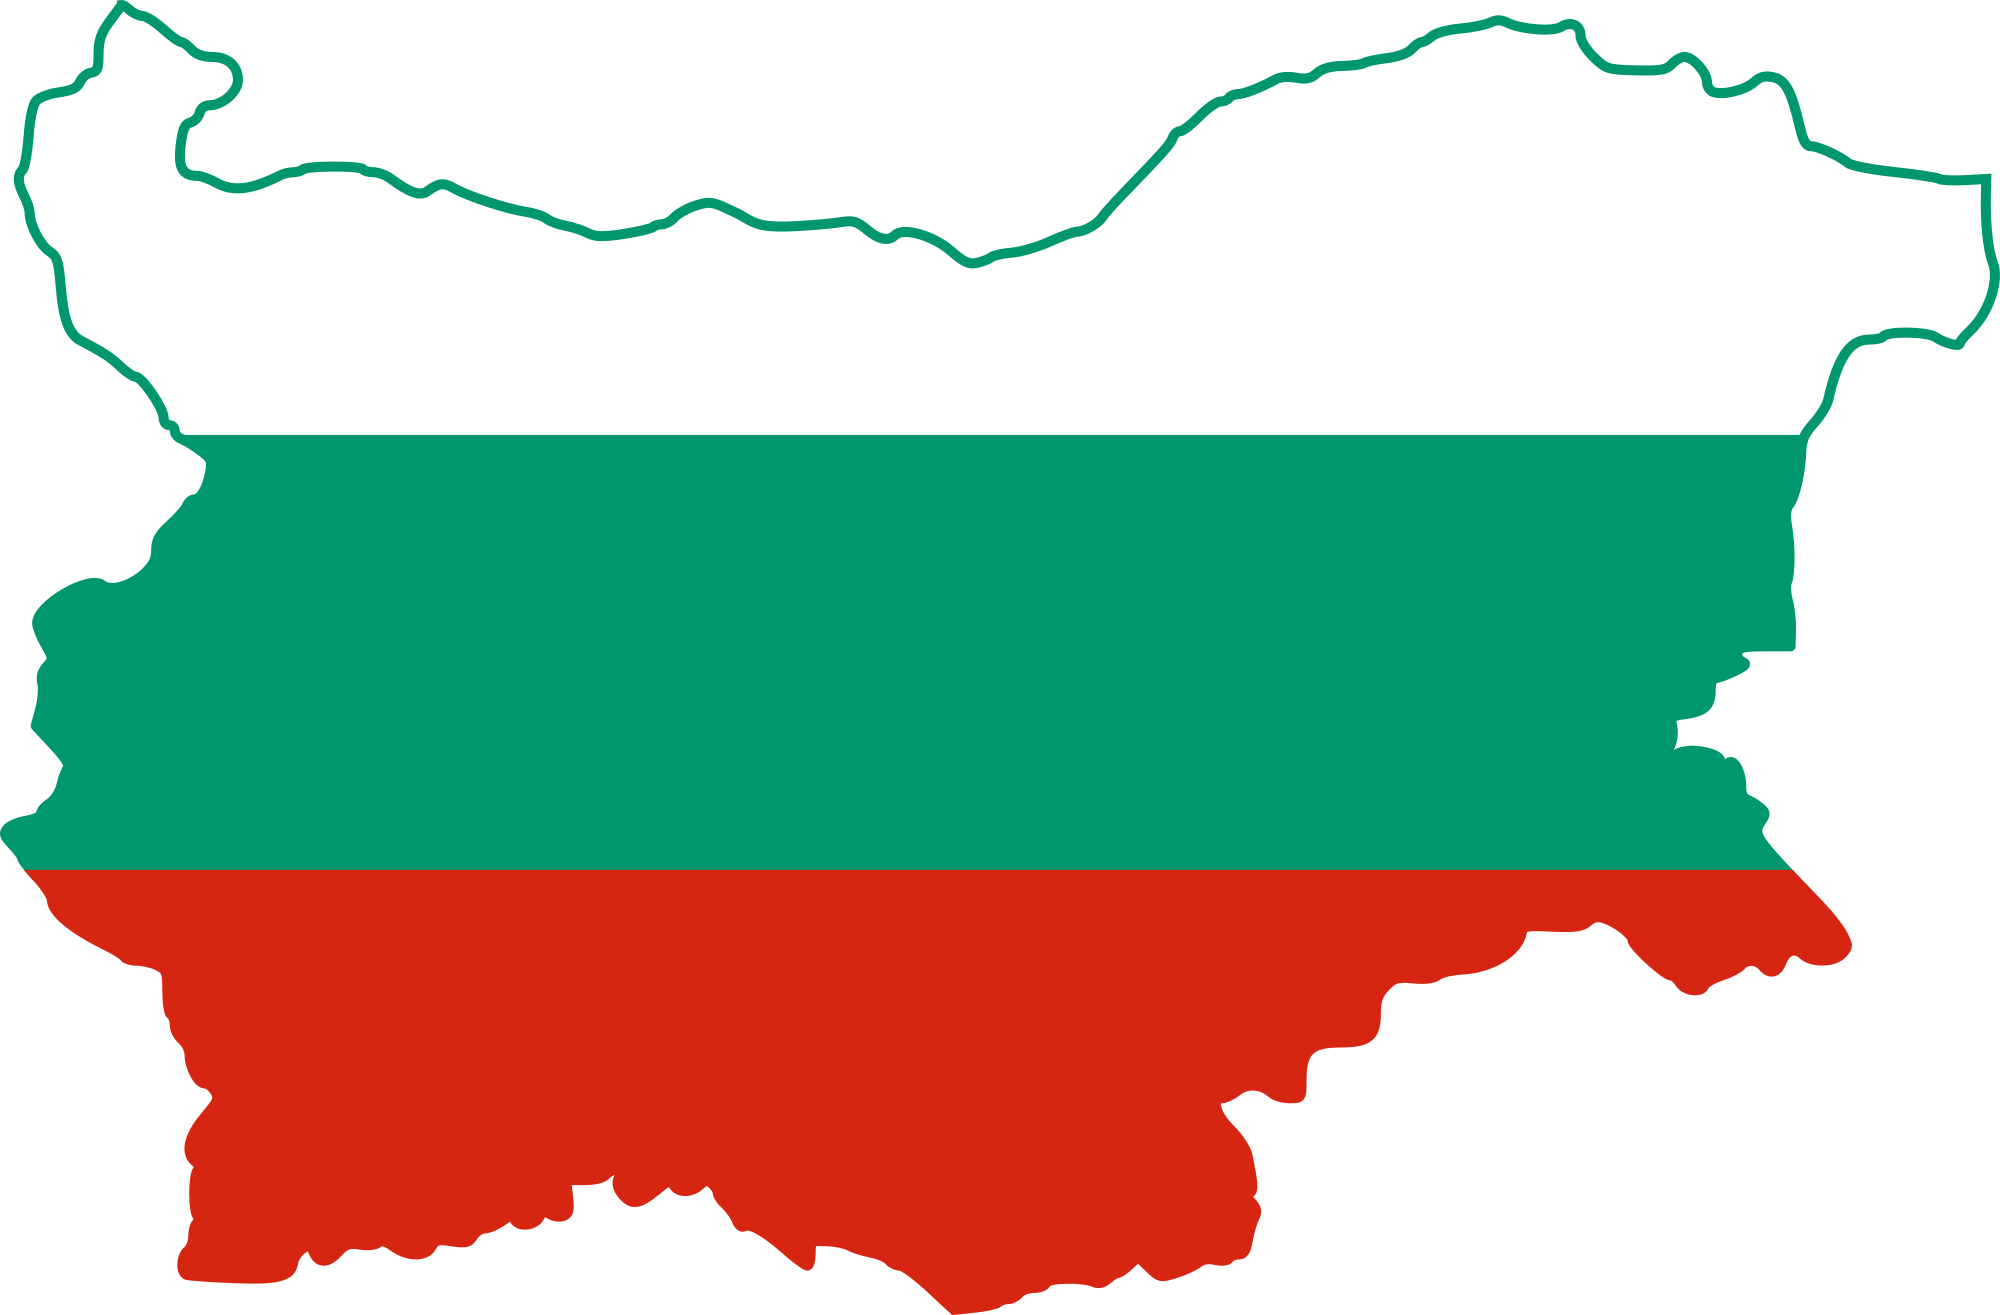 Bulgarian minister concerned over possible Greek farmers' blockades